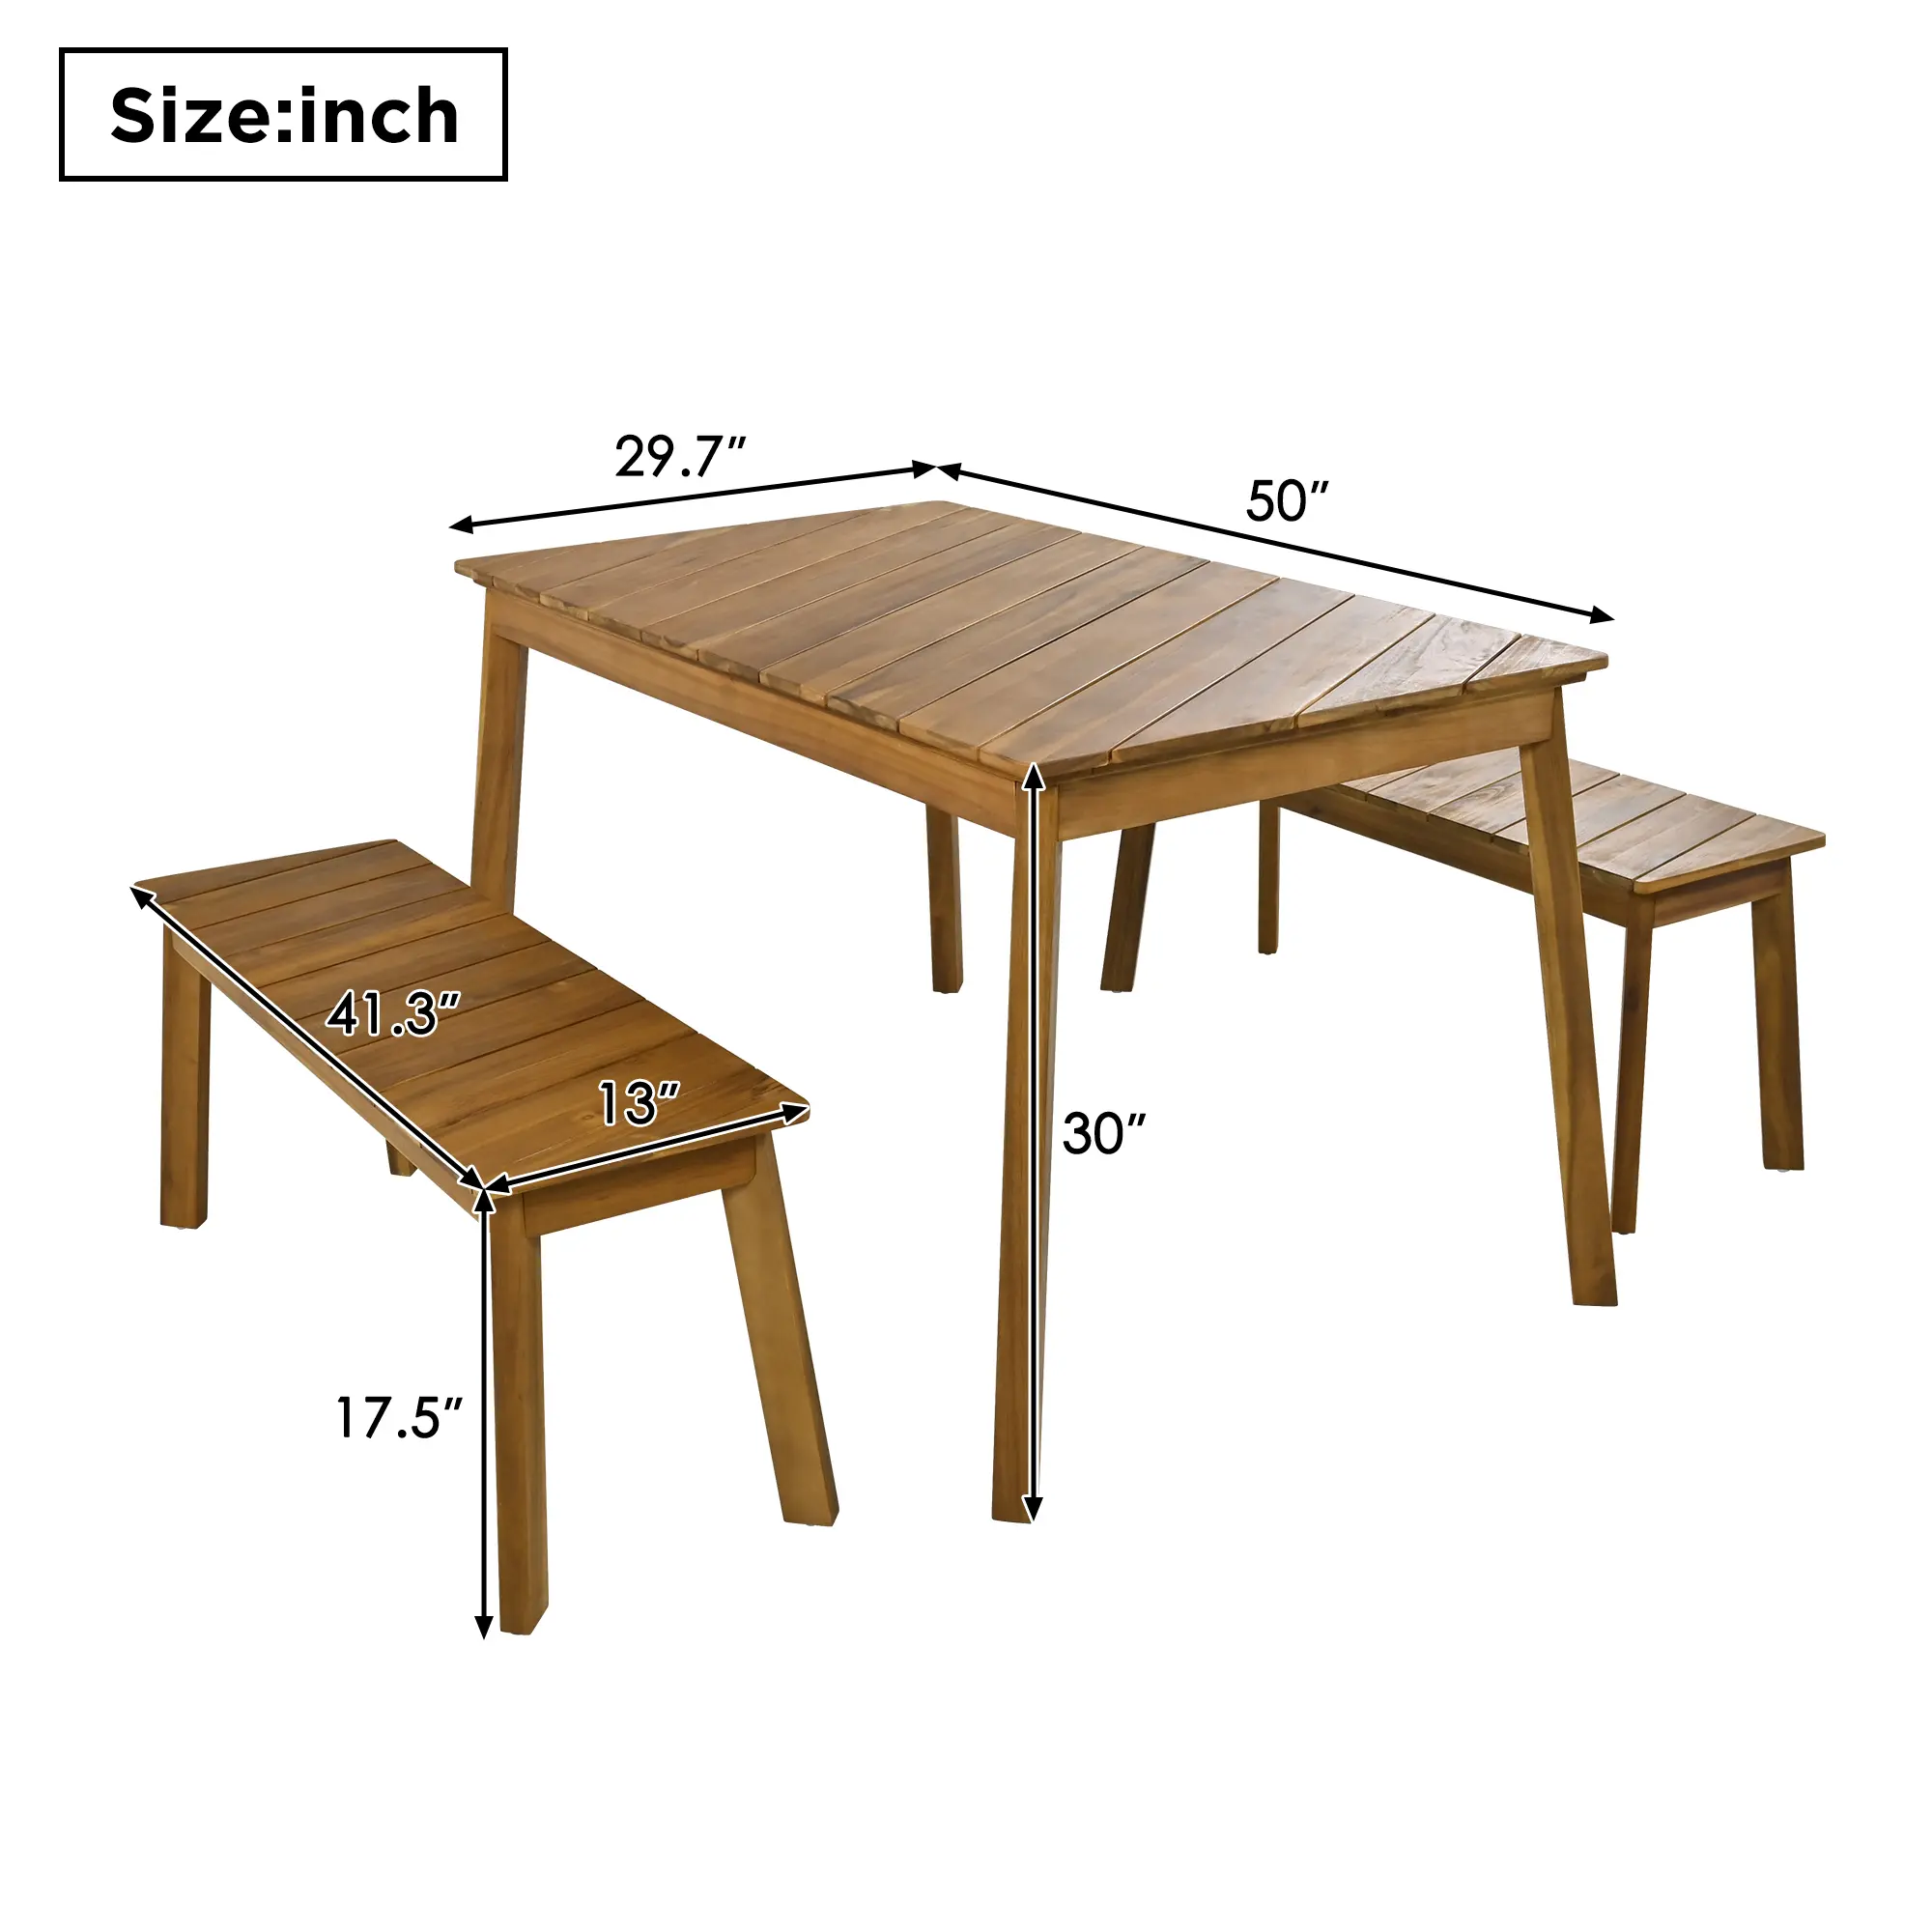 3 Pieces Acacia Wood Table Bench Dining Set For Outdoor Furniture